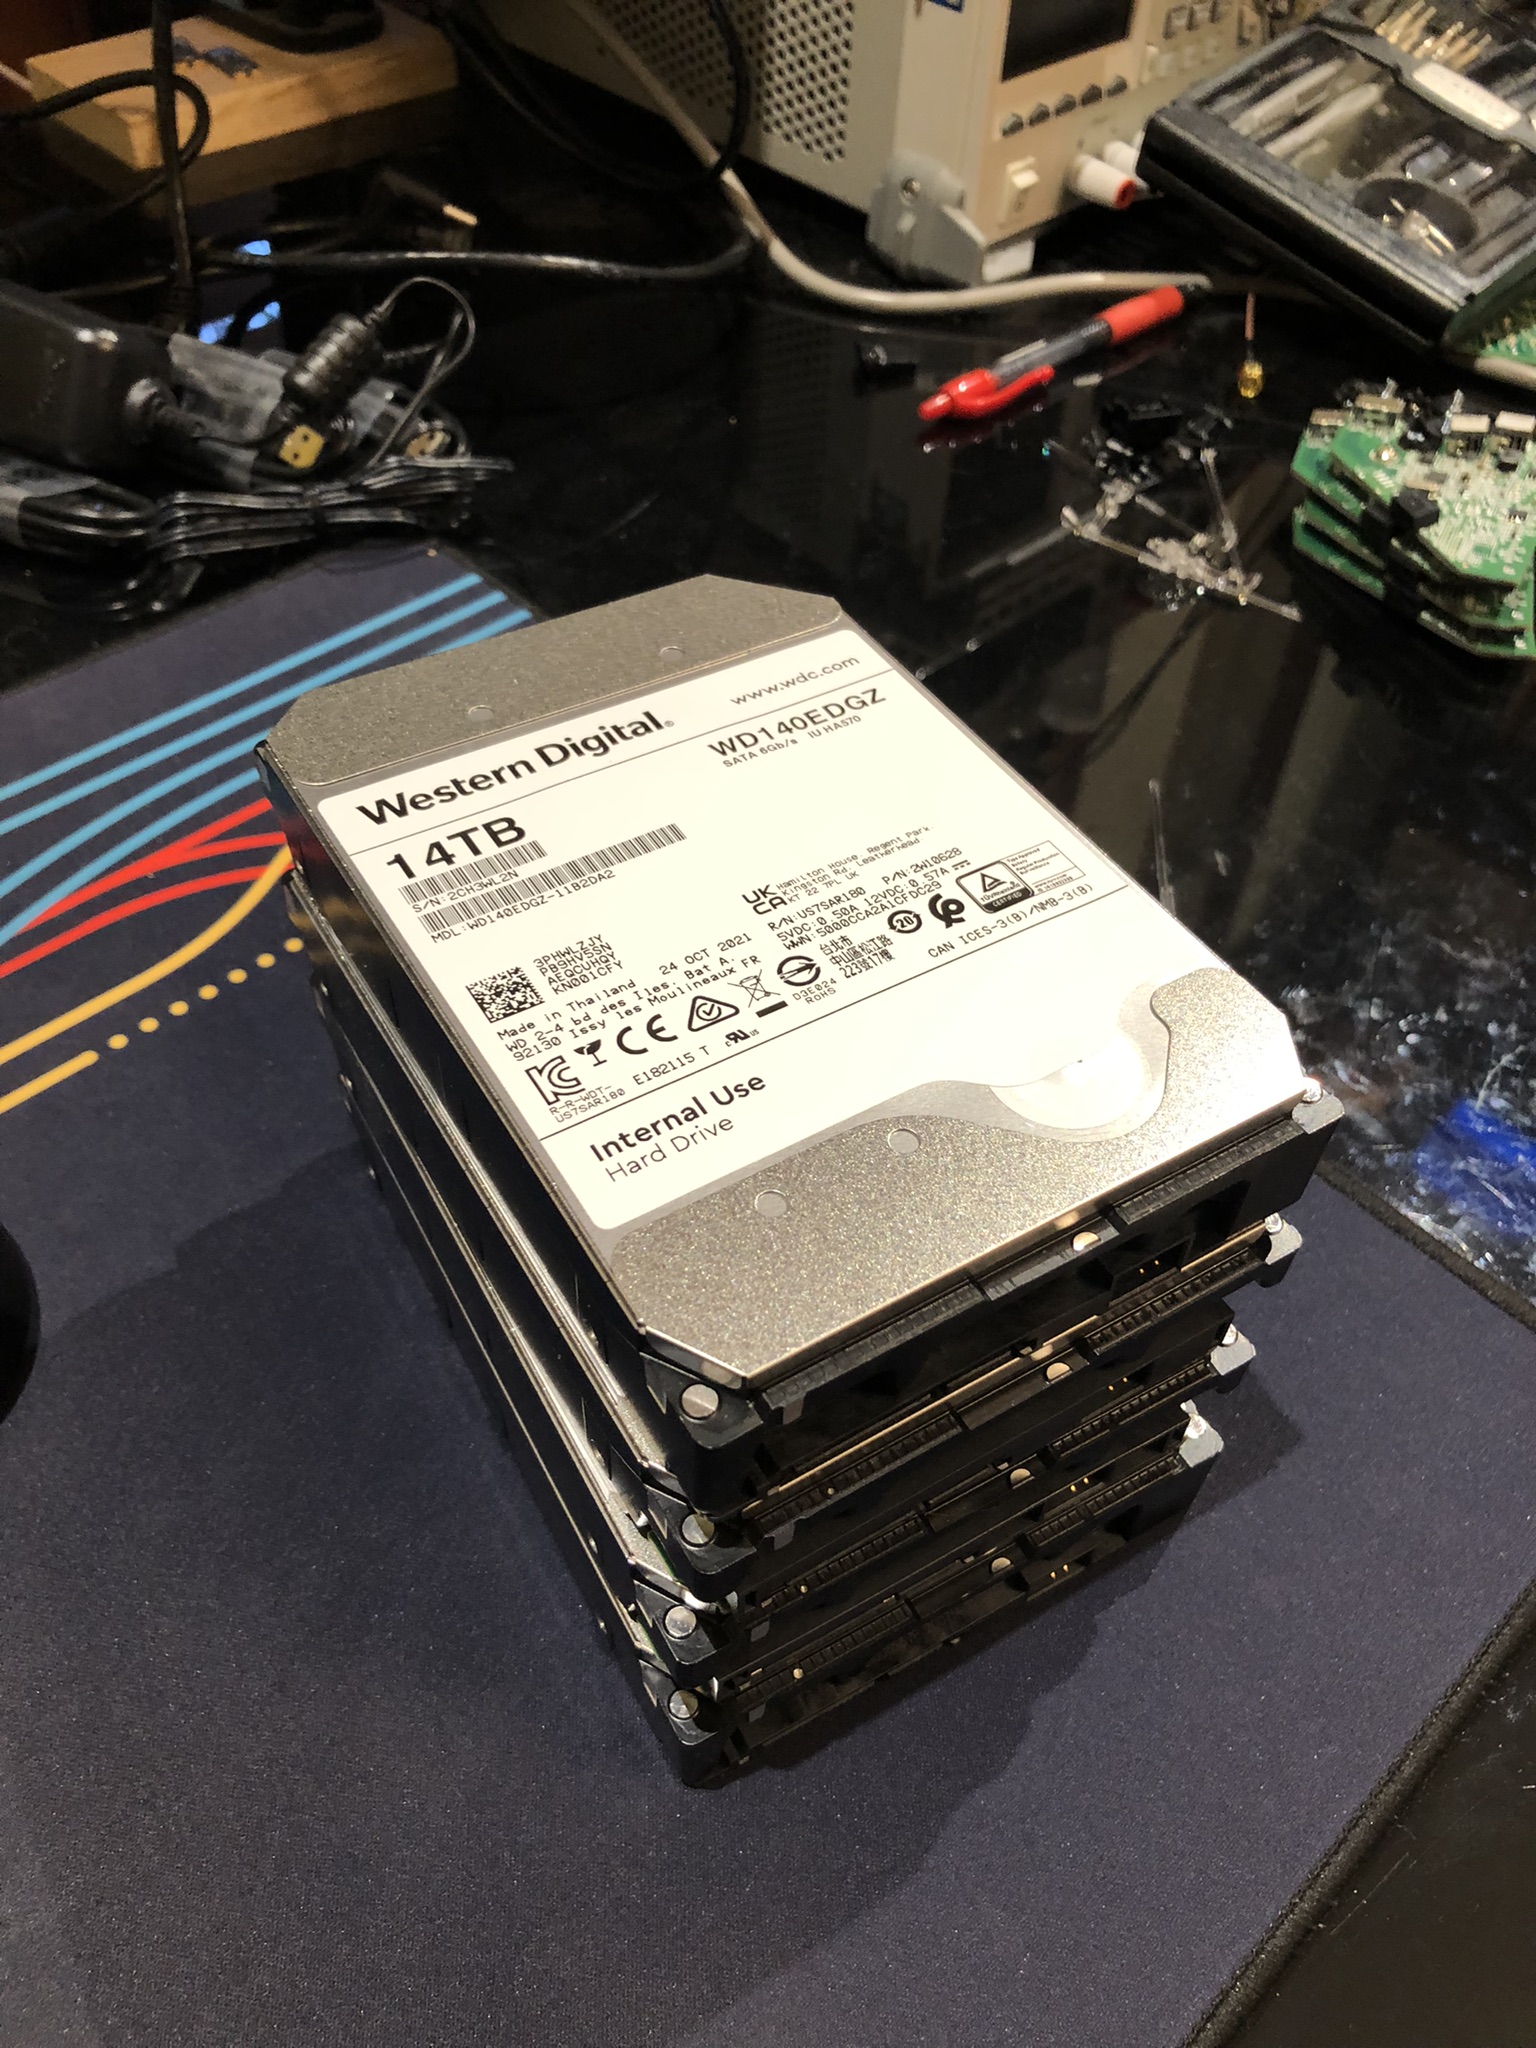 A stack of four 3.5inch harddrives